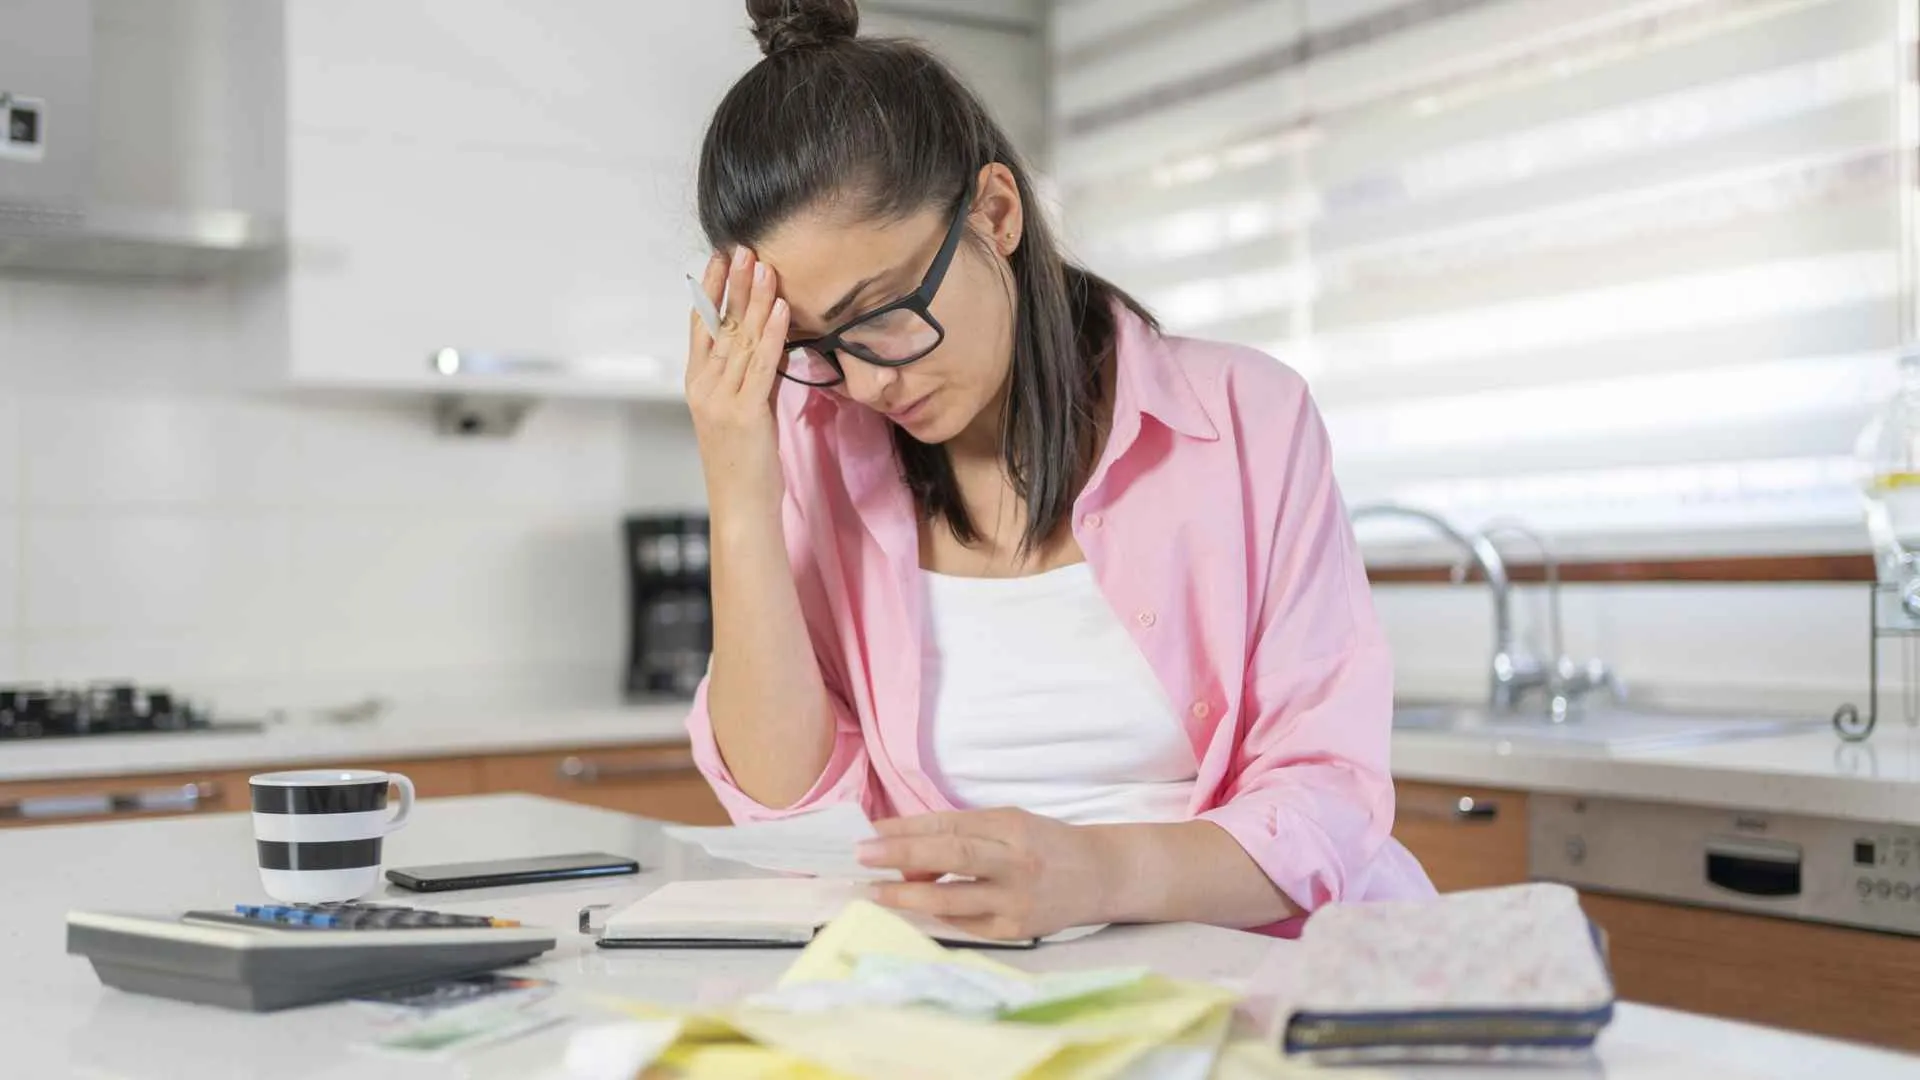 A woman looks sad and frustrated as she goes through her bills.